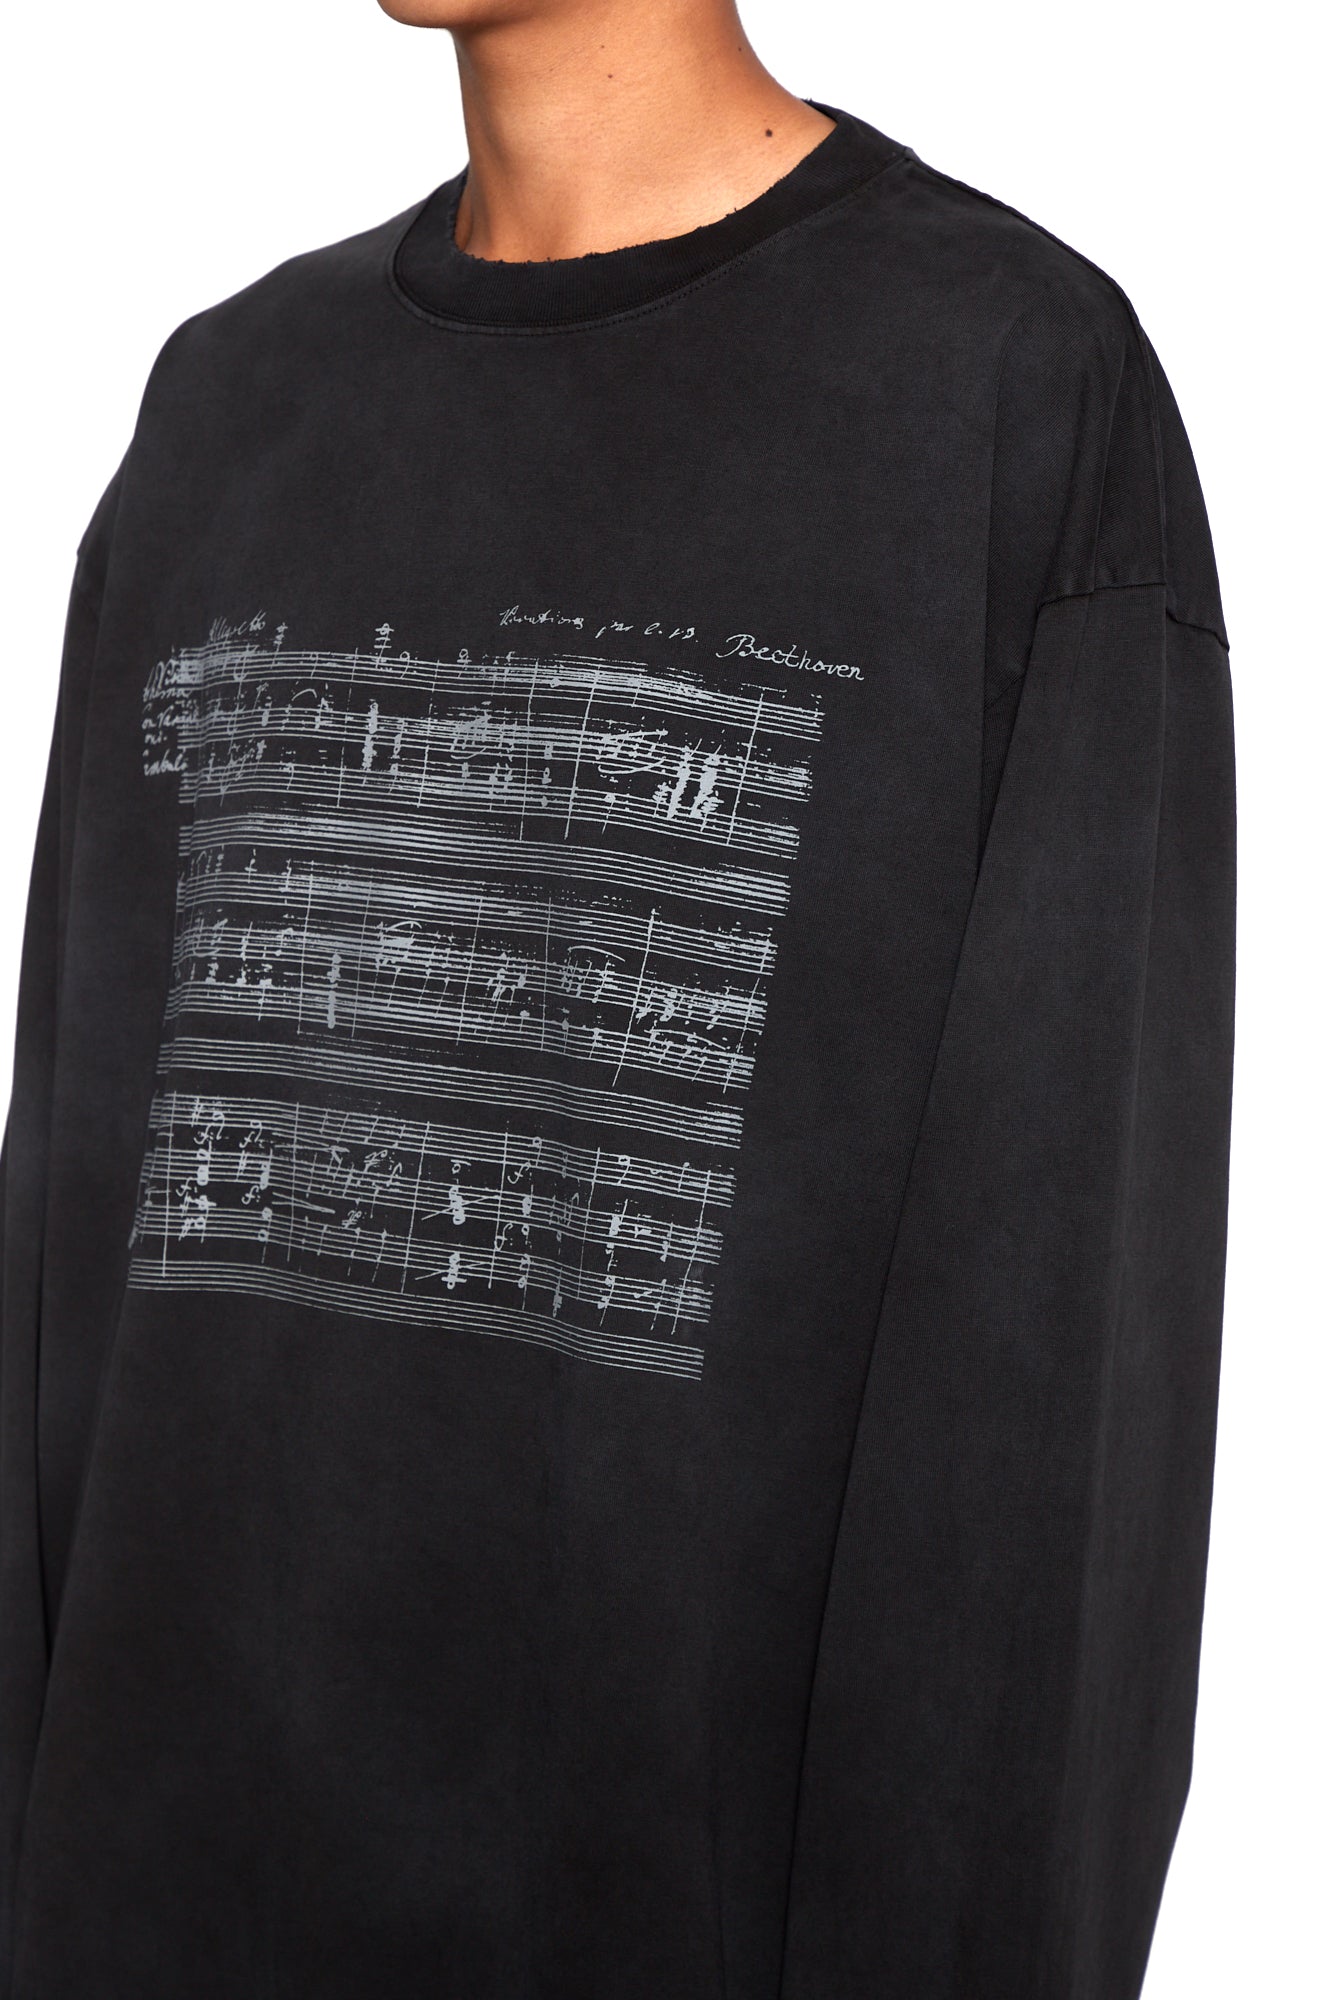 Load image into Gallery viewer, BLACK WASHED DISTRESSED AGING SHEET MUSIC PRINTED LONG SLEEVE T-SHIRT
